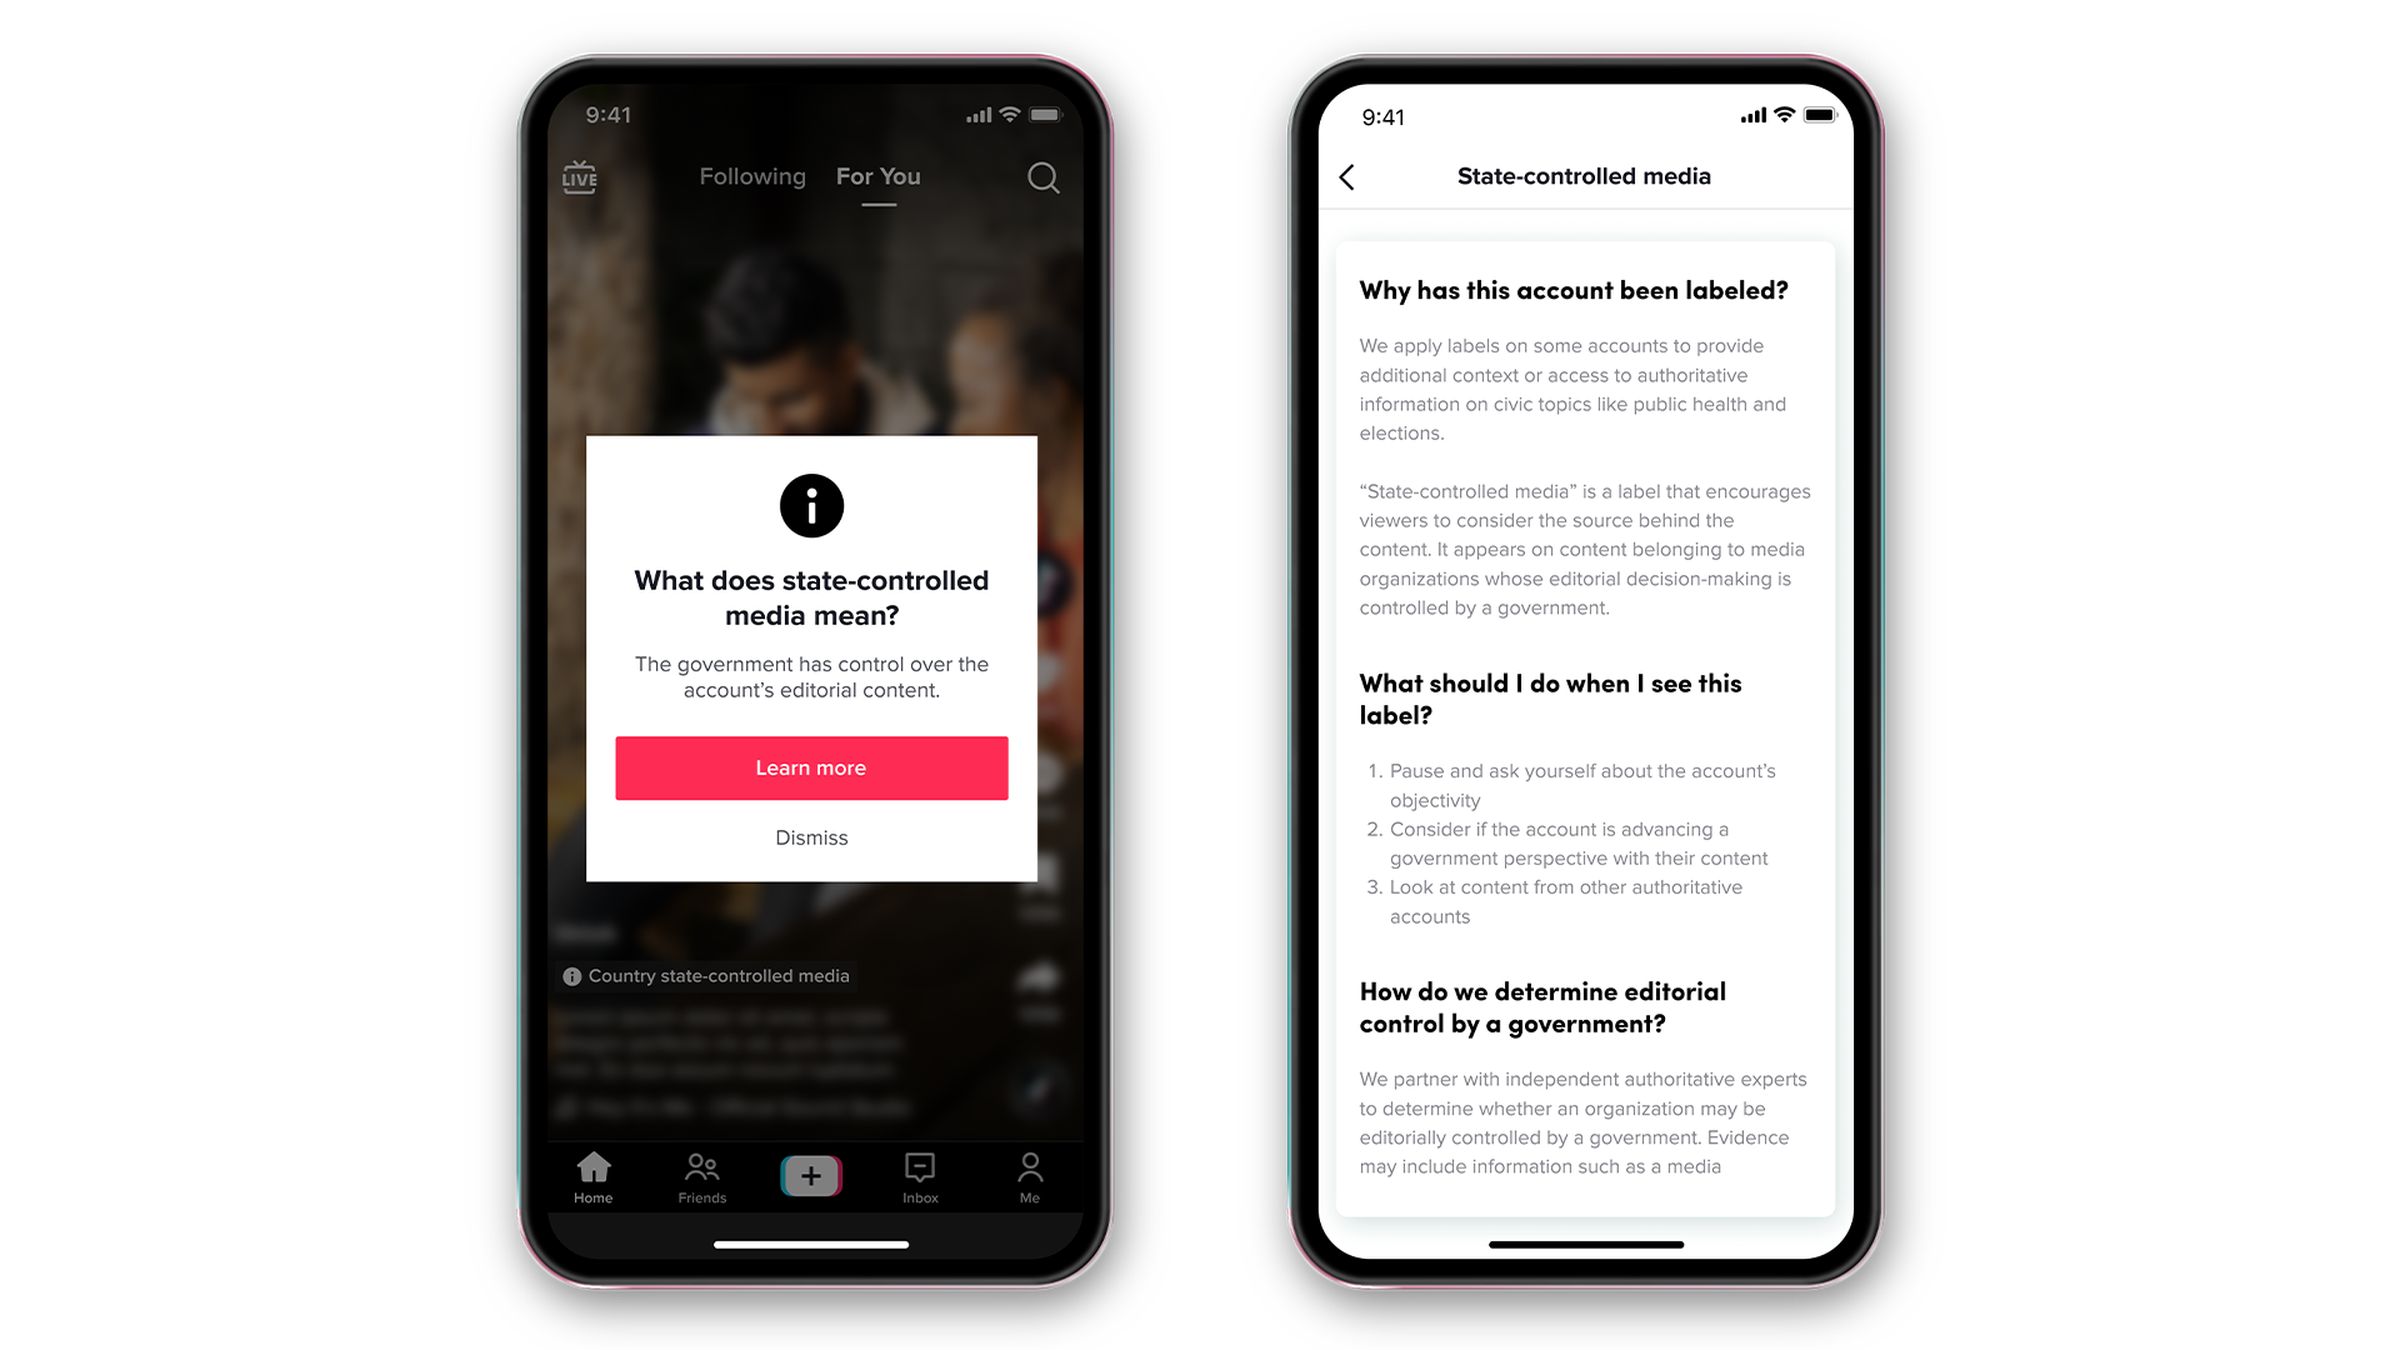 The TikTok app shows a state-controlled media pop-up, with questions and answers about the poster.